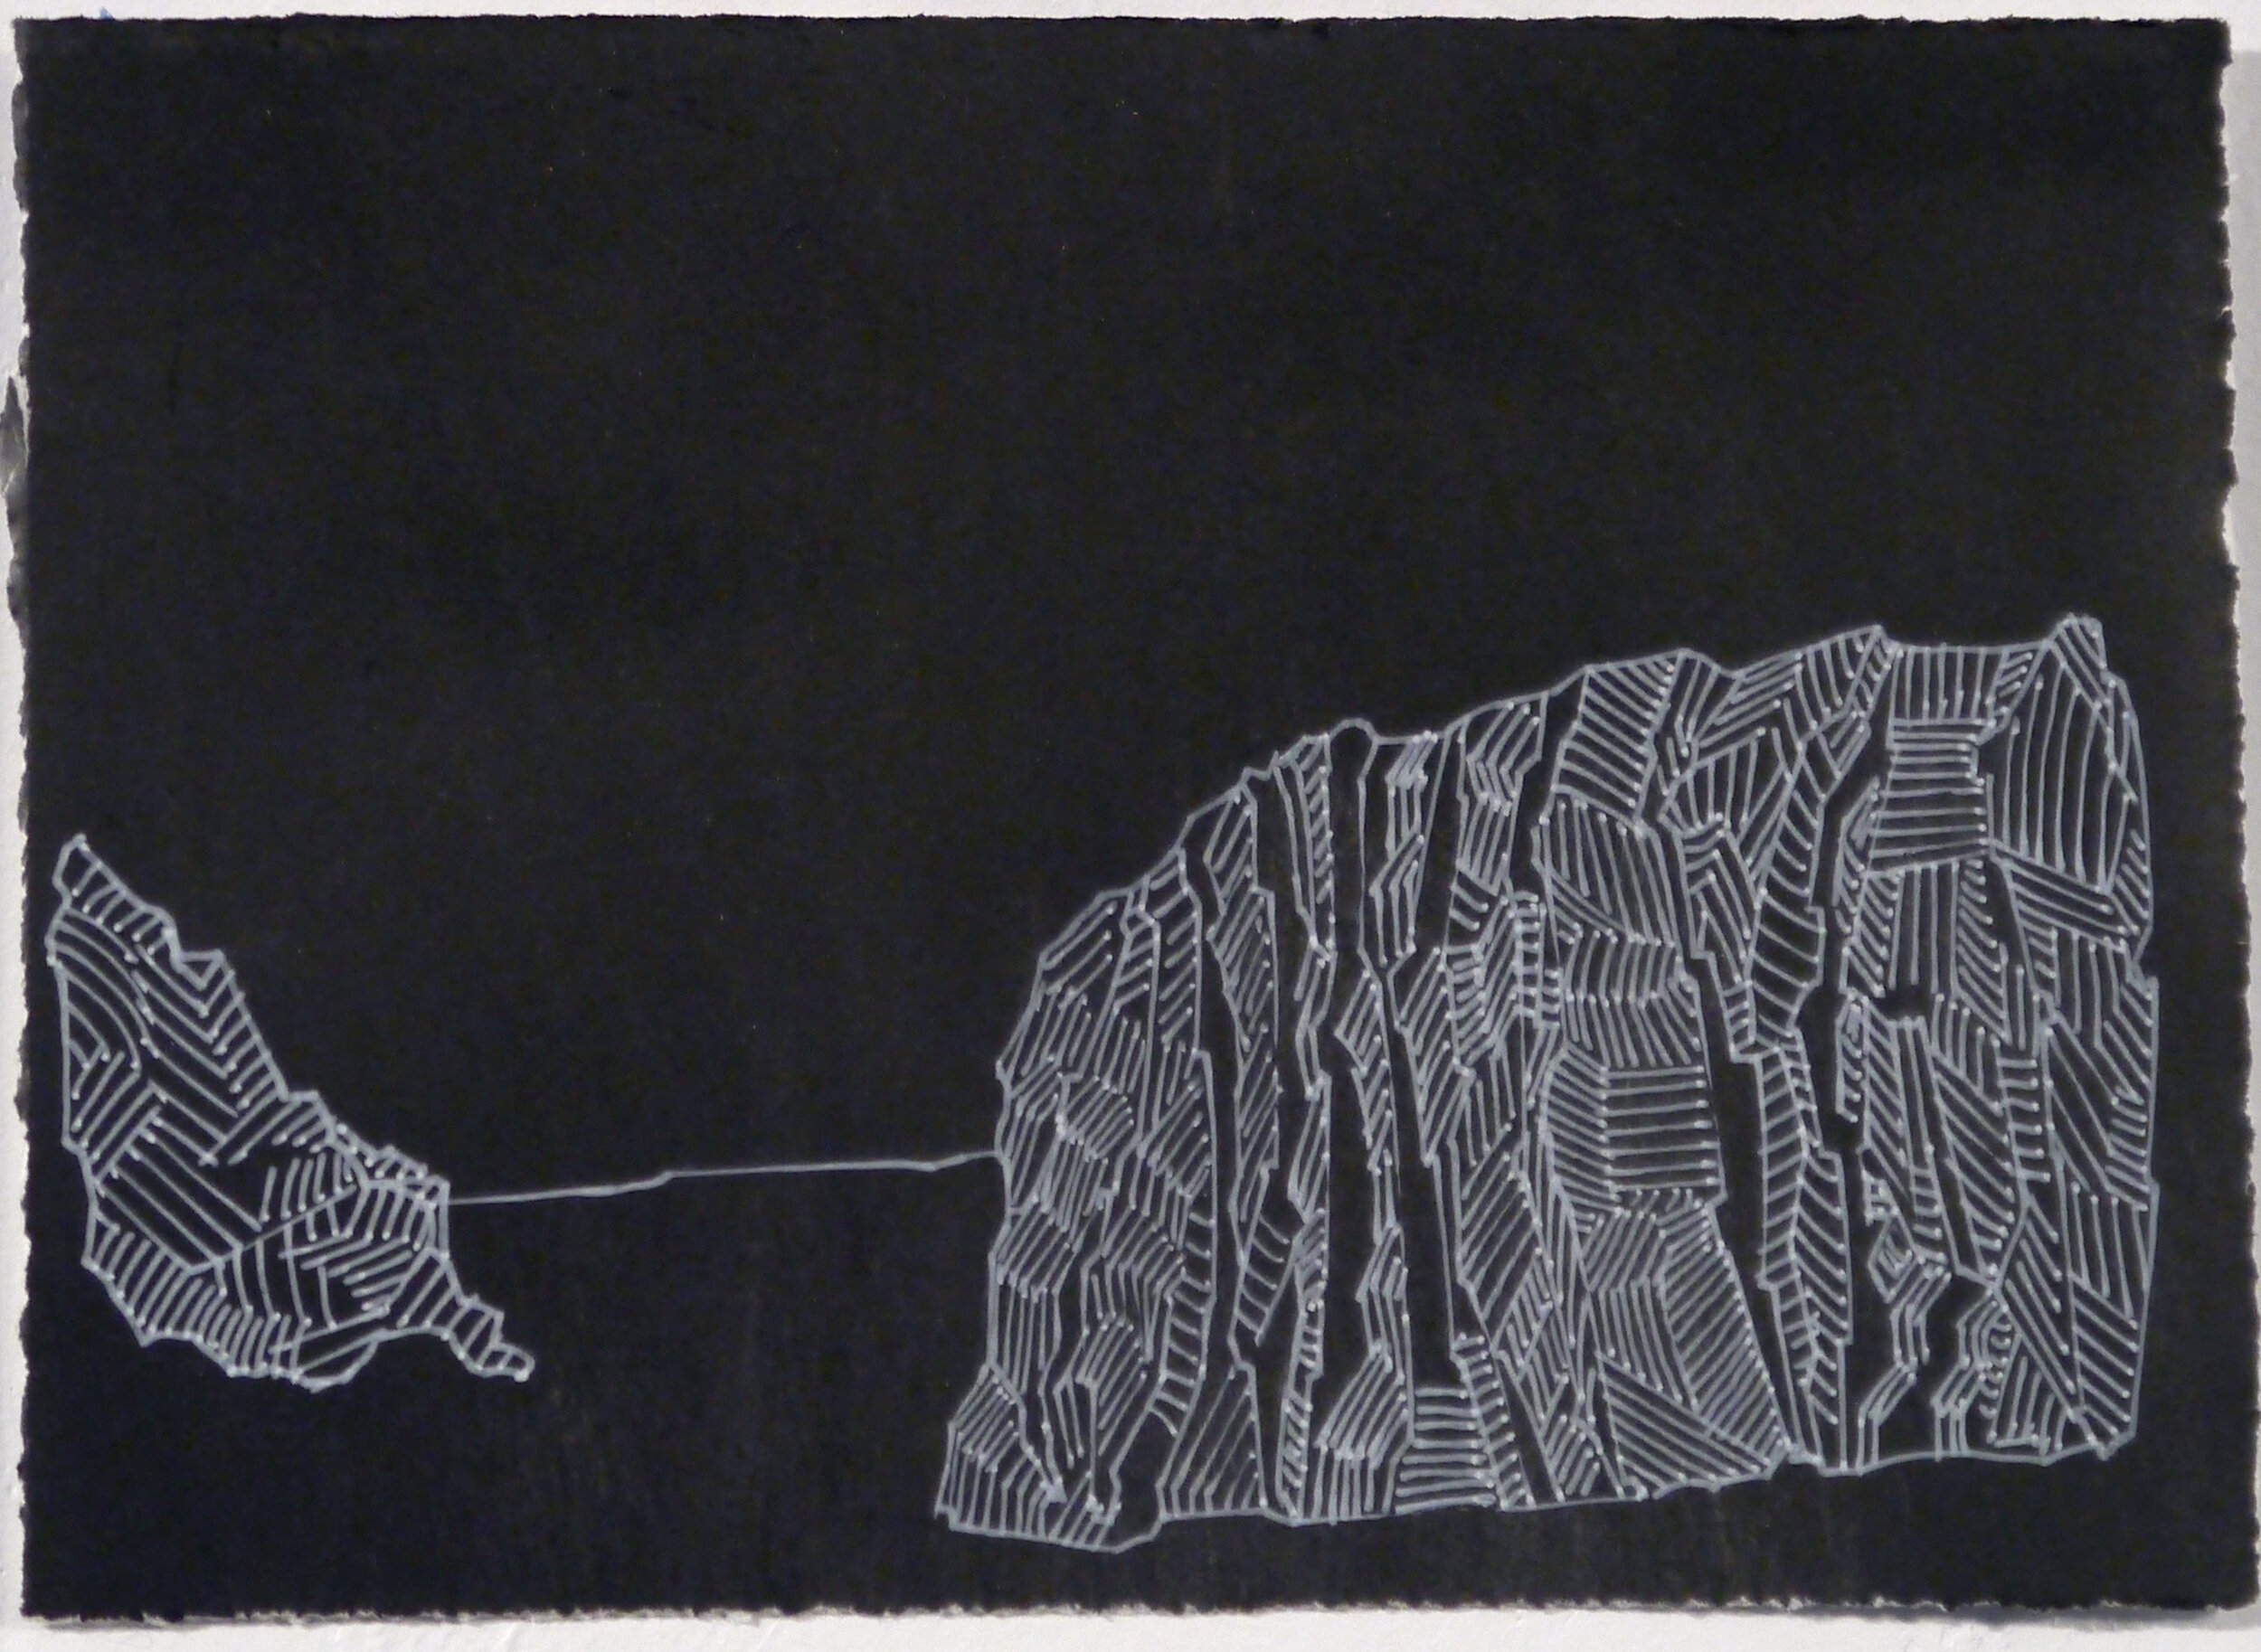  Kathline Carr, “Graphite Mine #2” Ink and Graphite Washes on Paper 